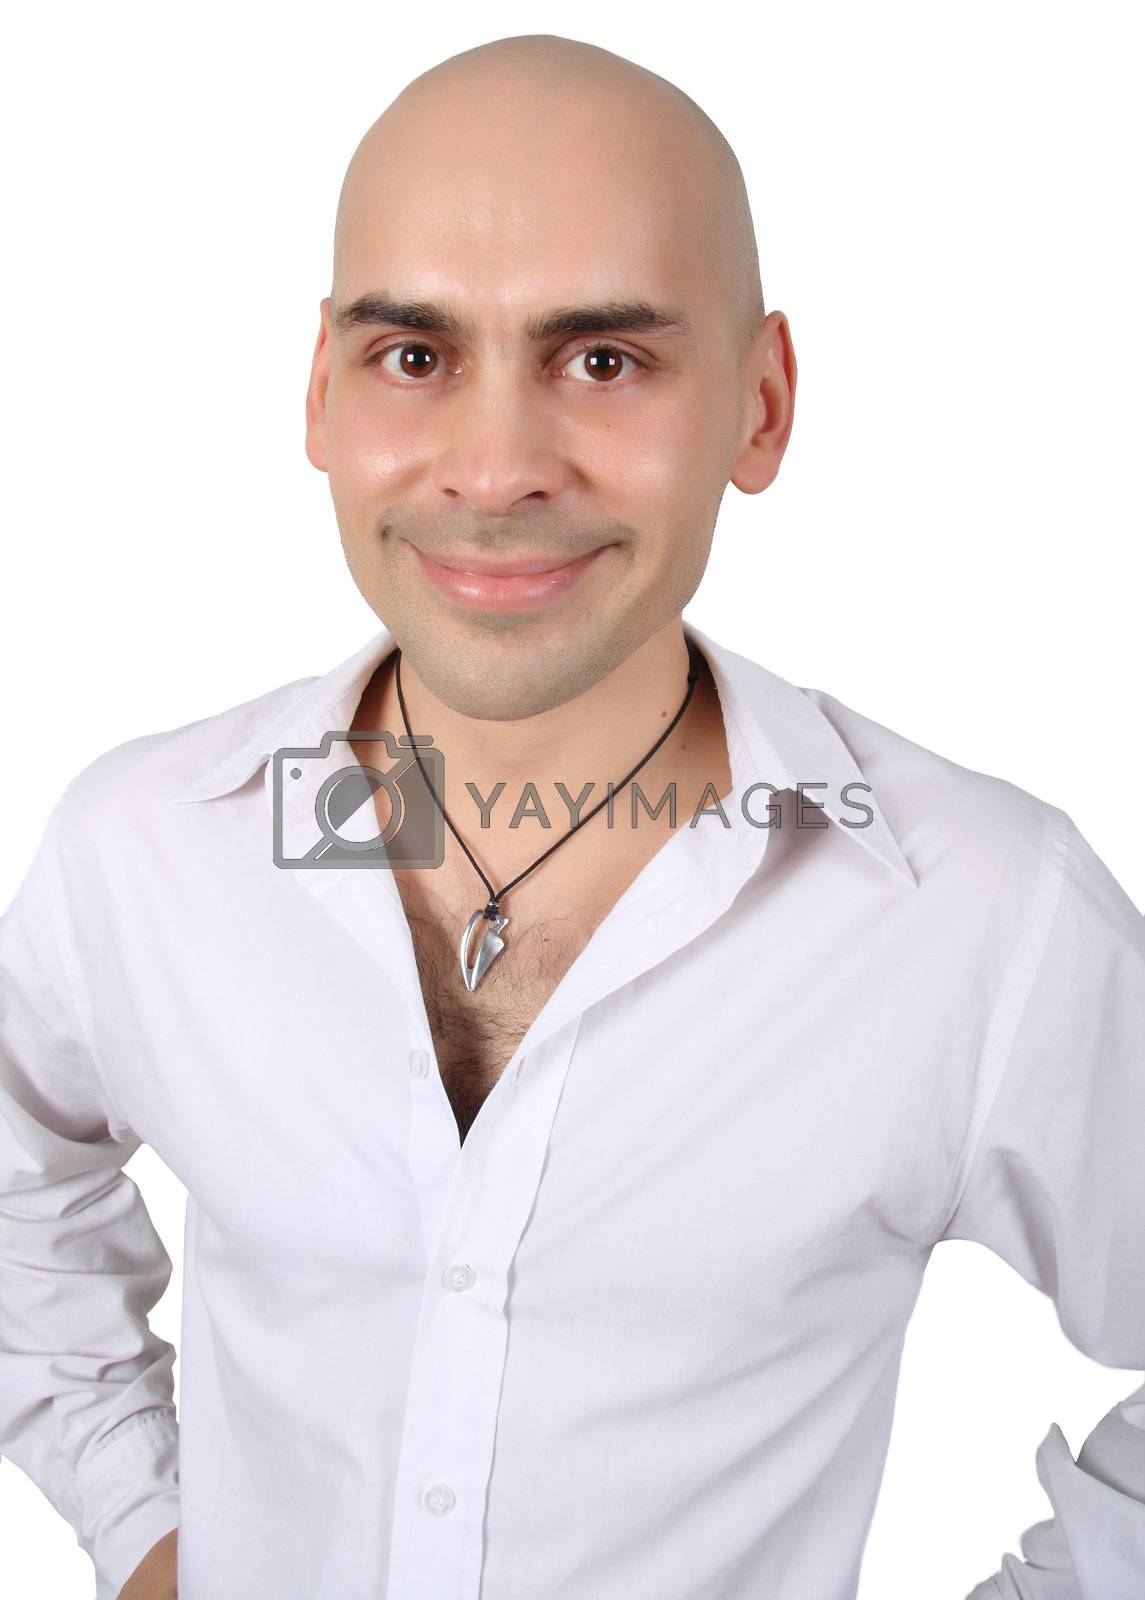 Royalty free image of bald handsome man by AndyTu